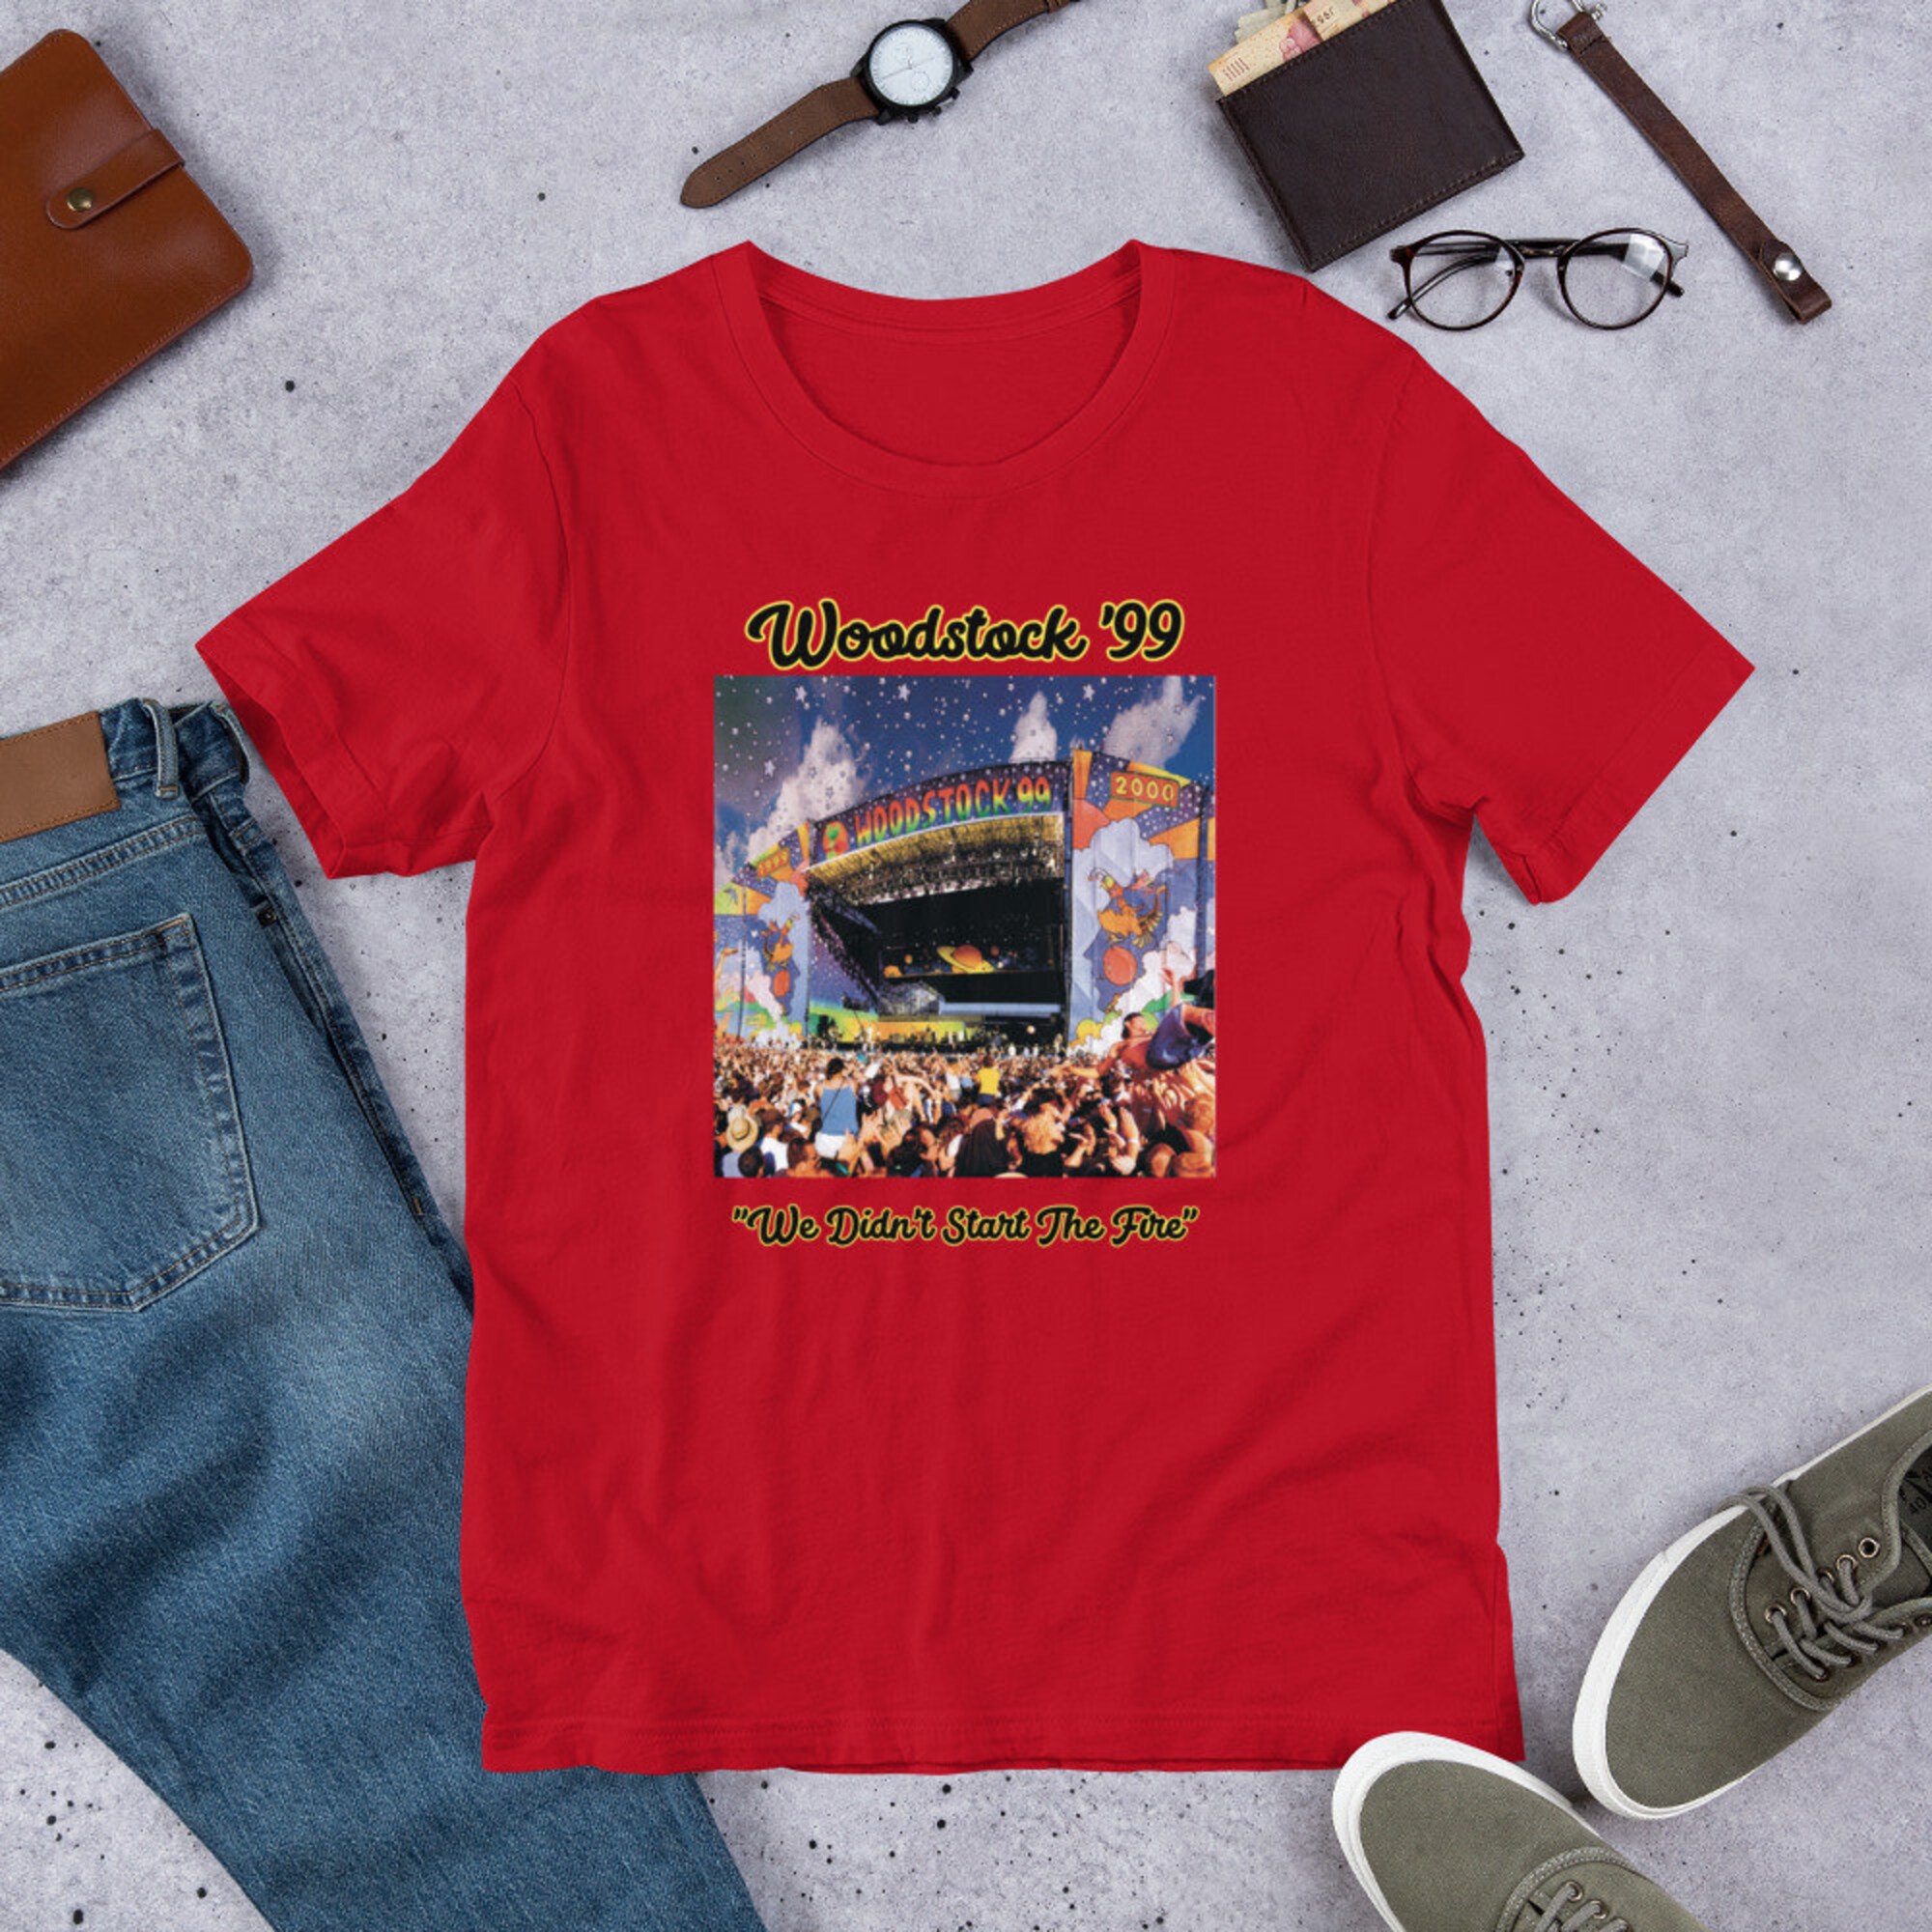 Discover Woodstock '99 - We Didn't Start The Fire - Festival T-Shirt - Fun Retro - Historical -